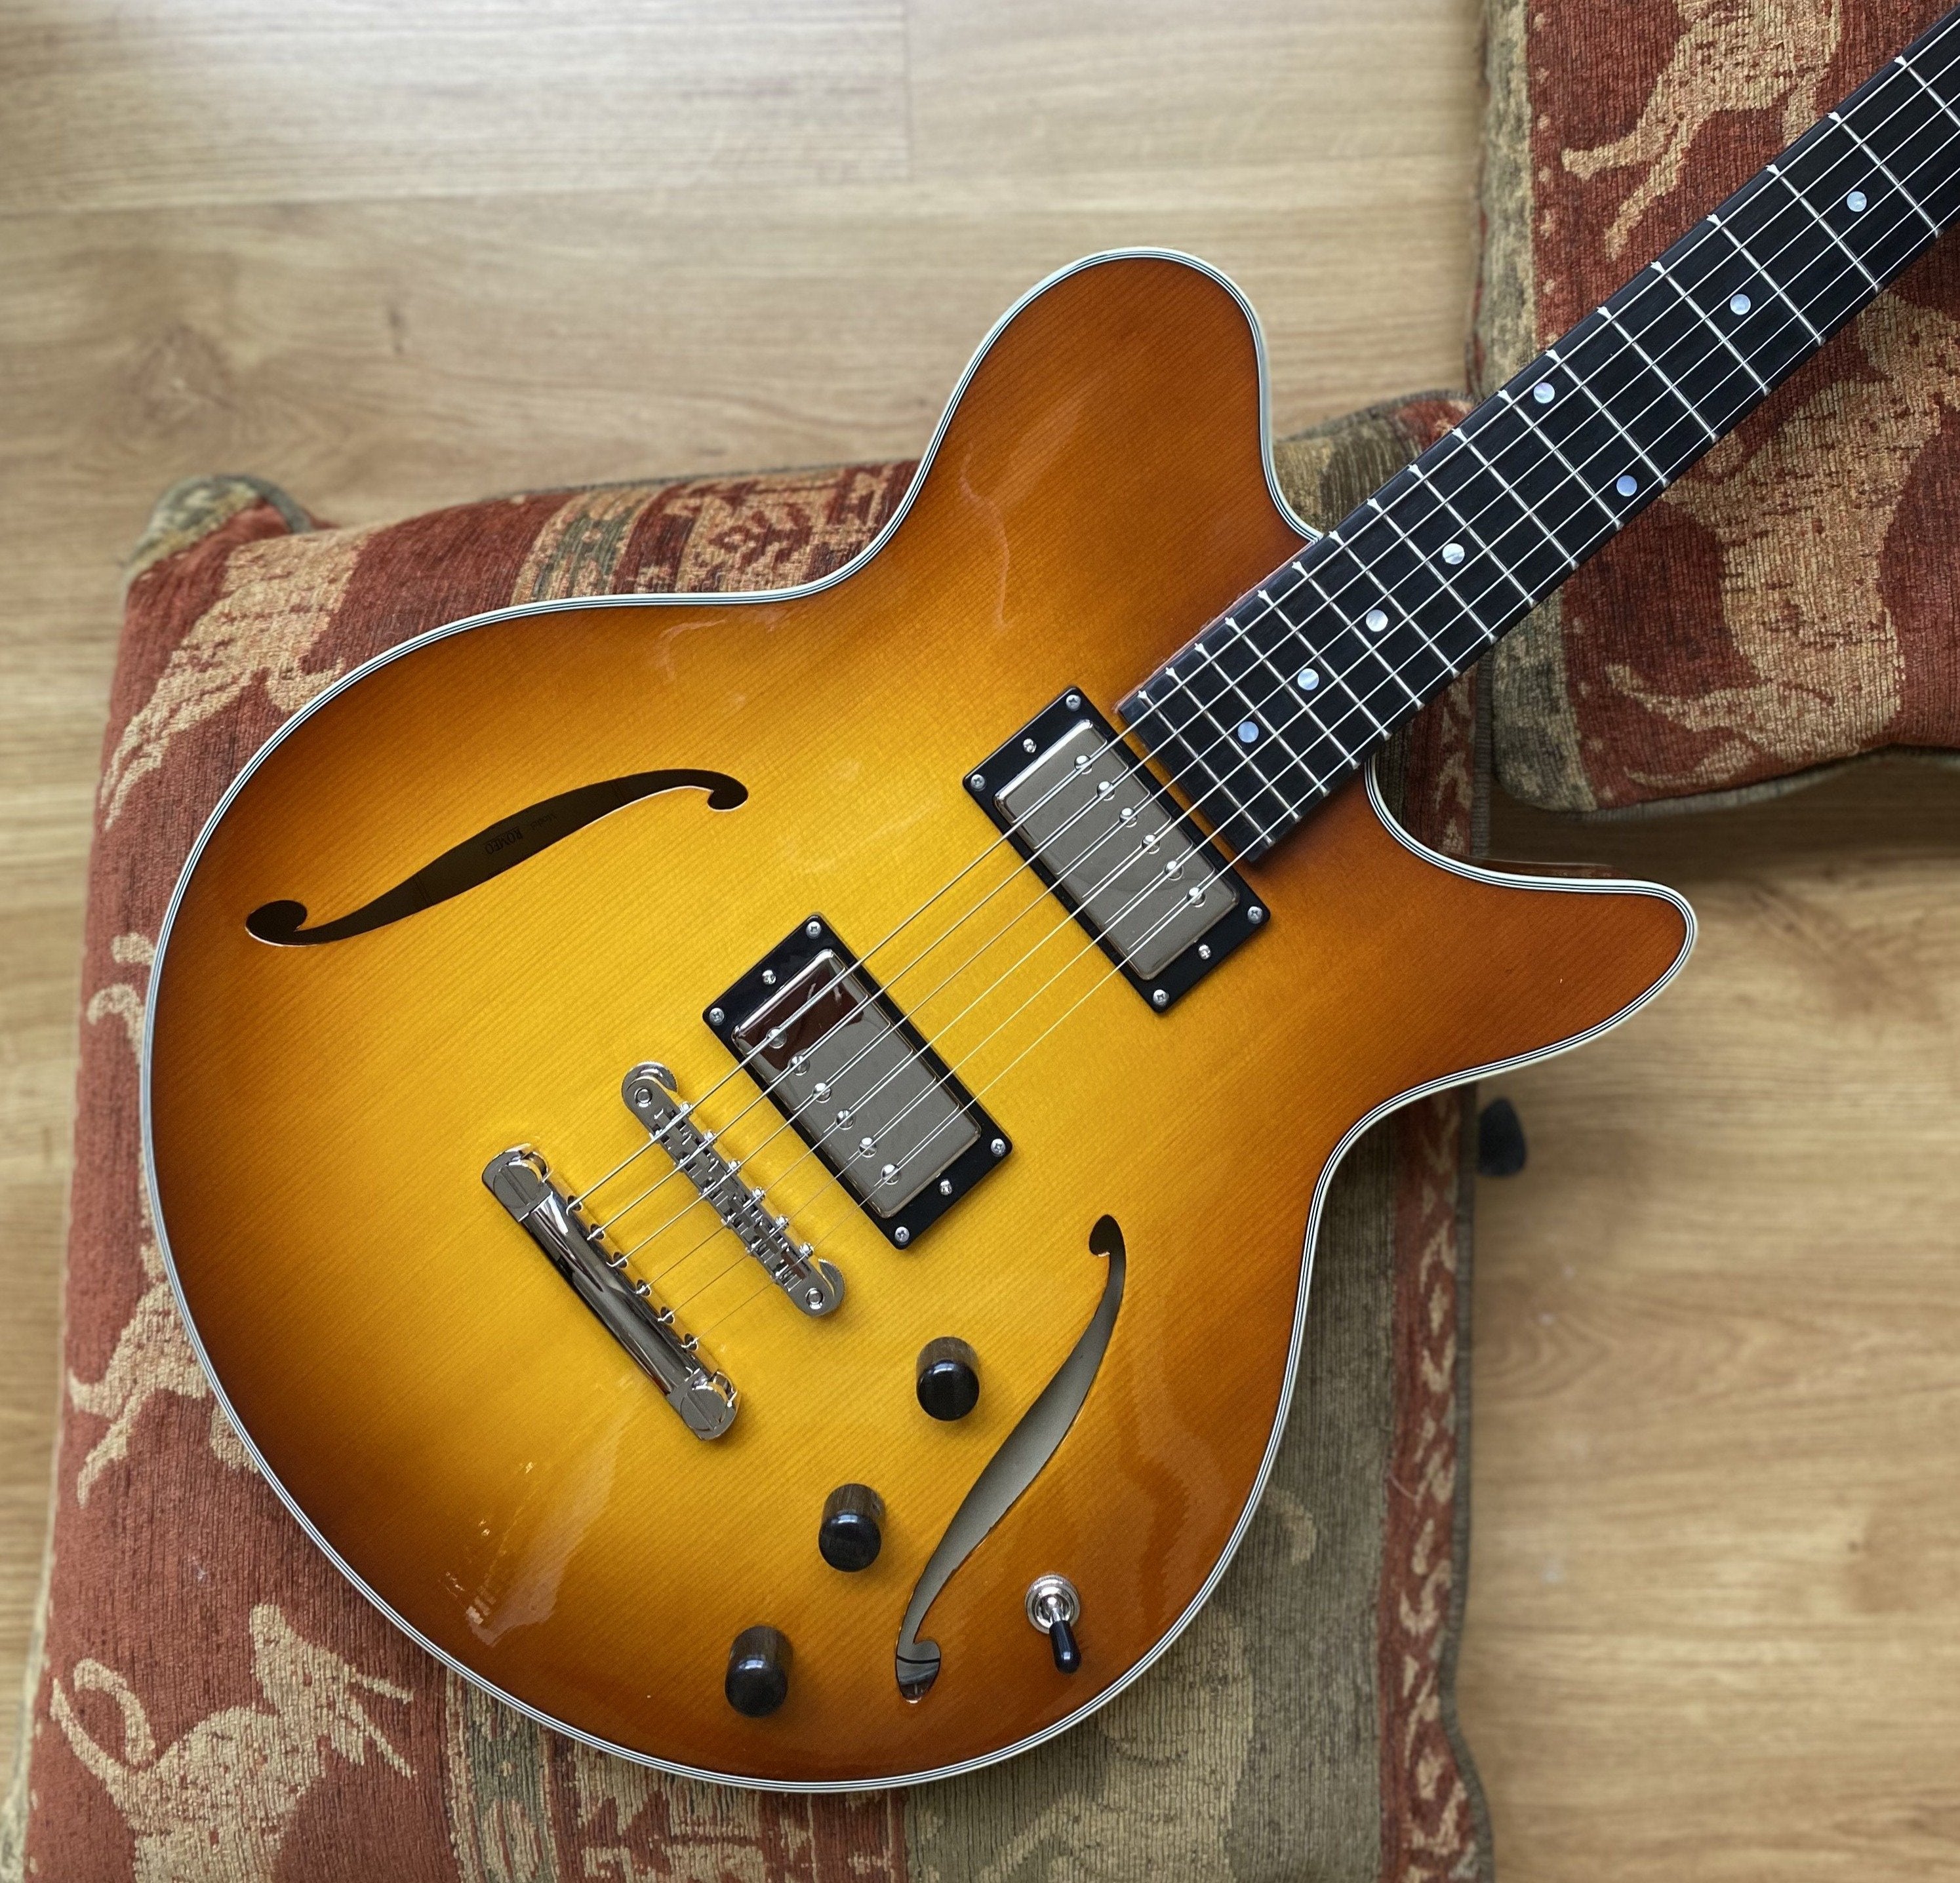 Eastman Romeo, Electric Guitar for sale at Richards Guitars.